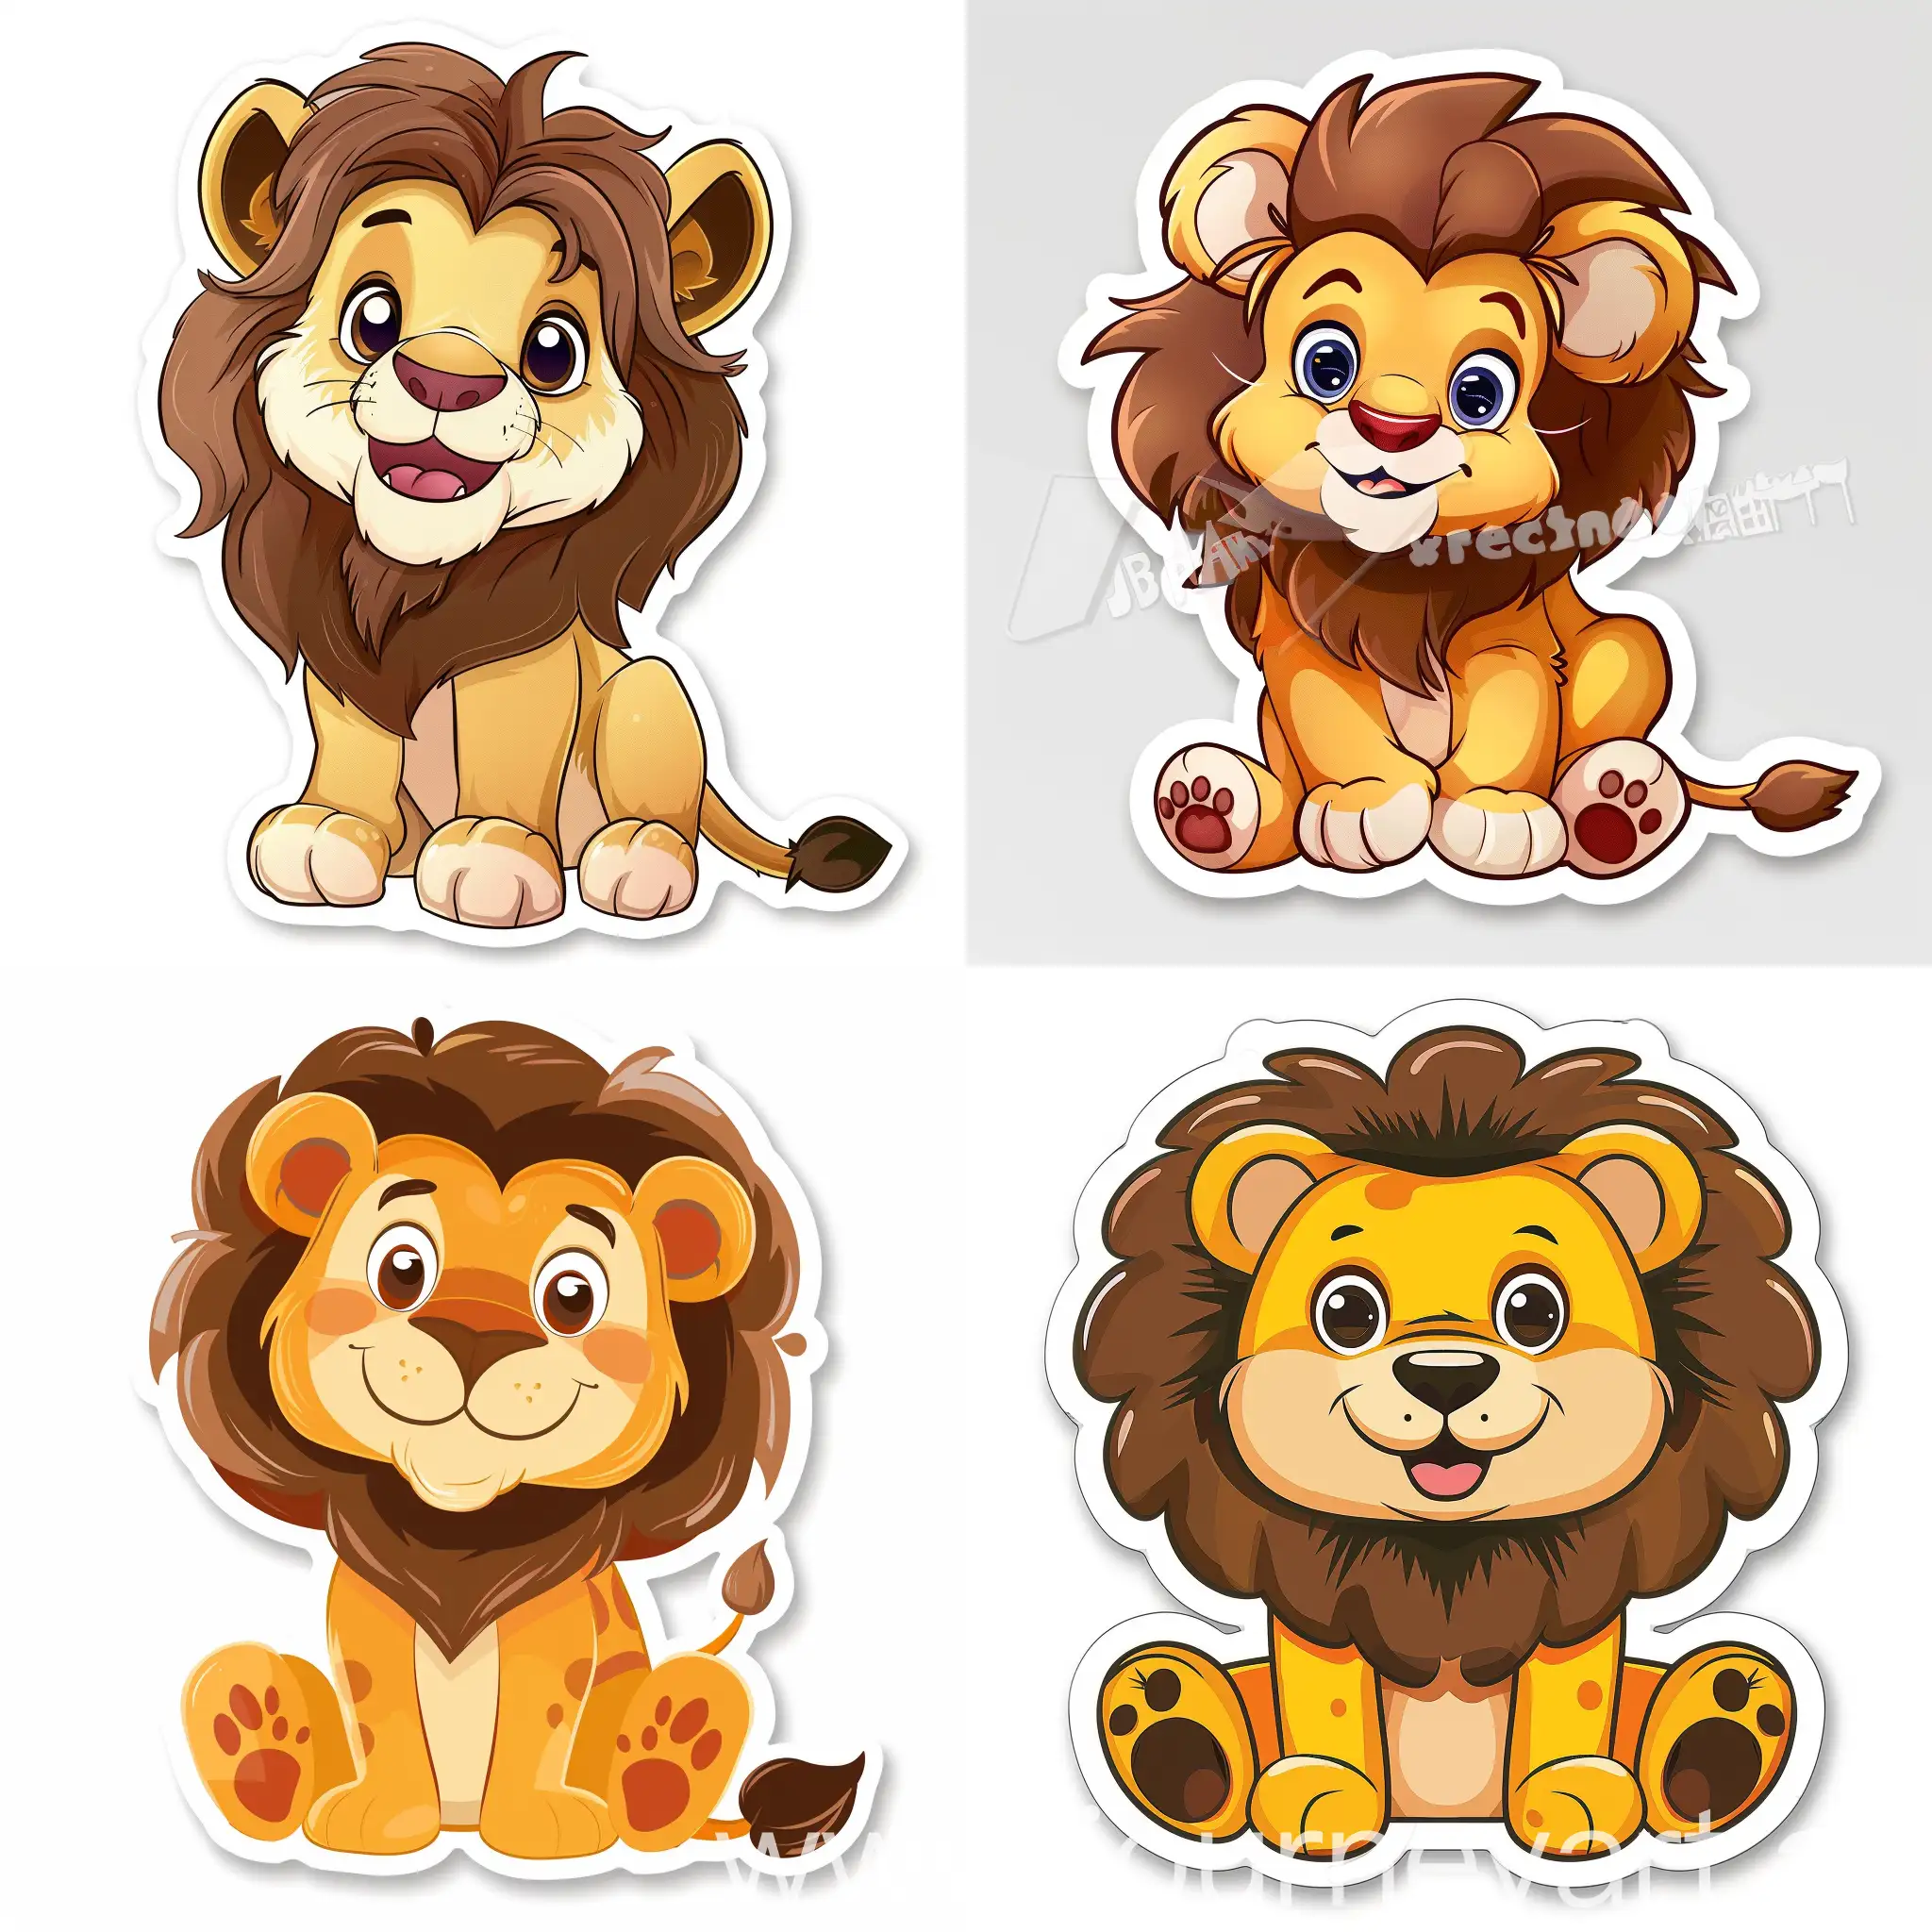 sticker of cartoon little lion, in high quality vector style